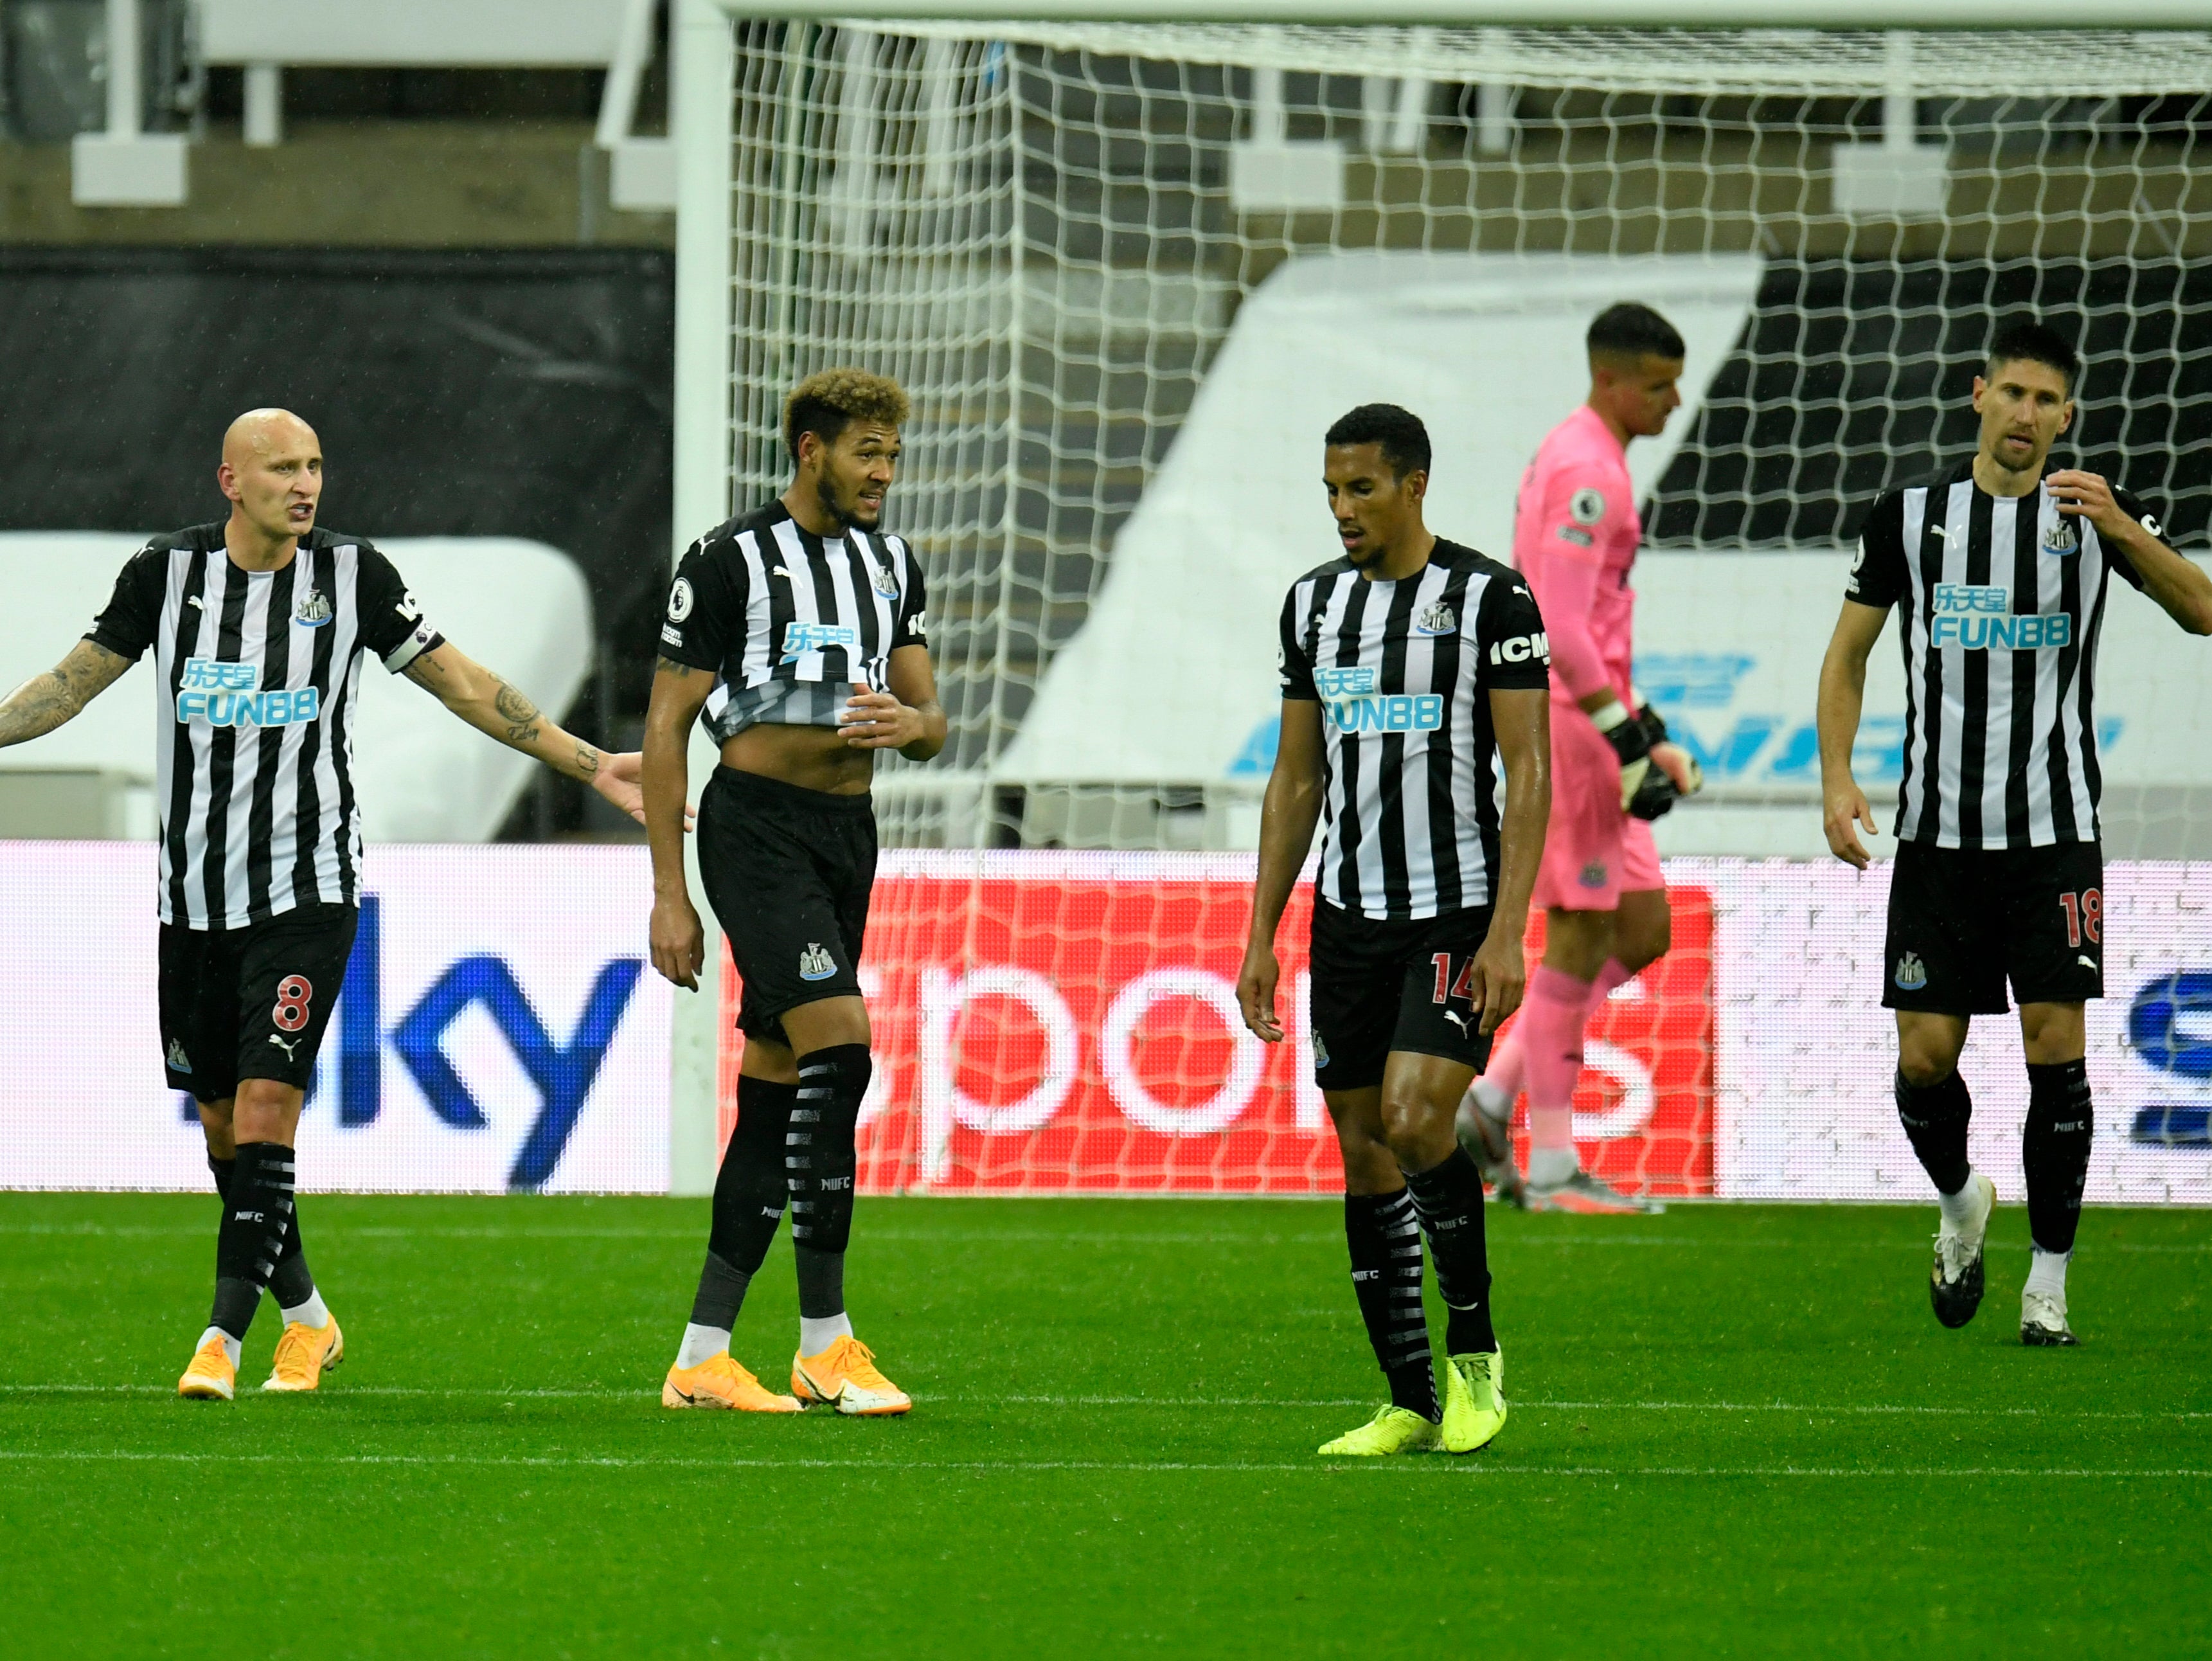 Newcastle with have a target on their back after change in ownership